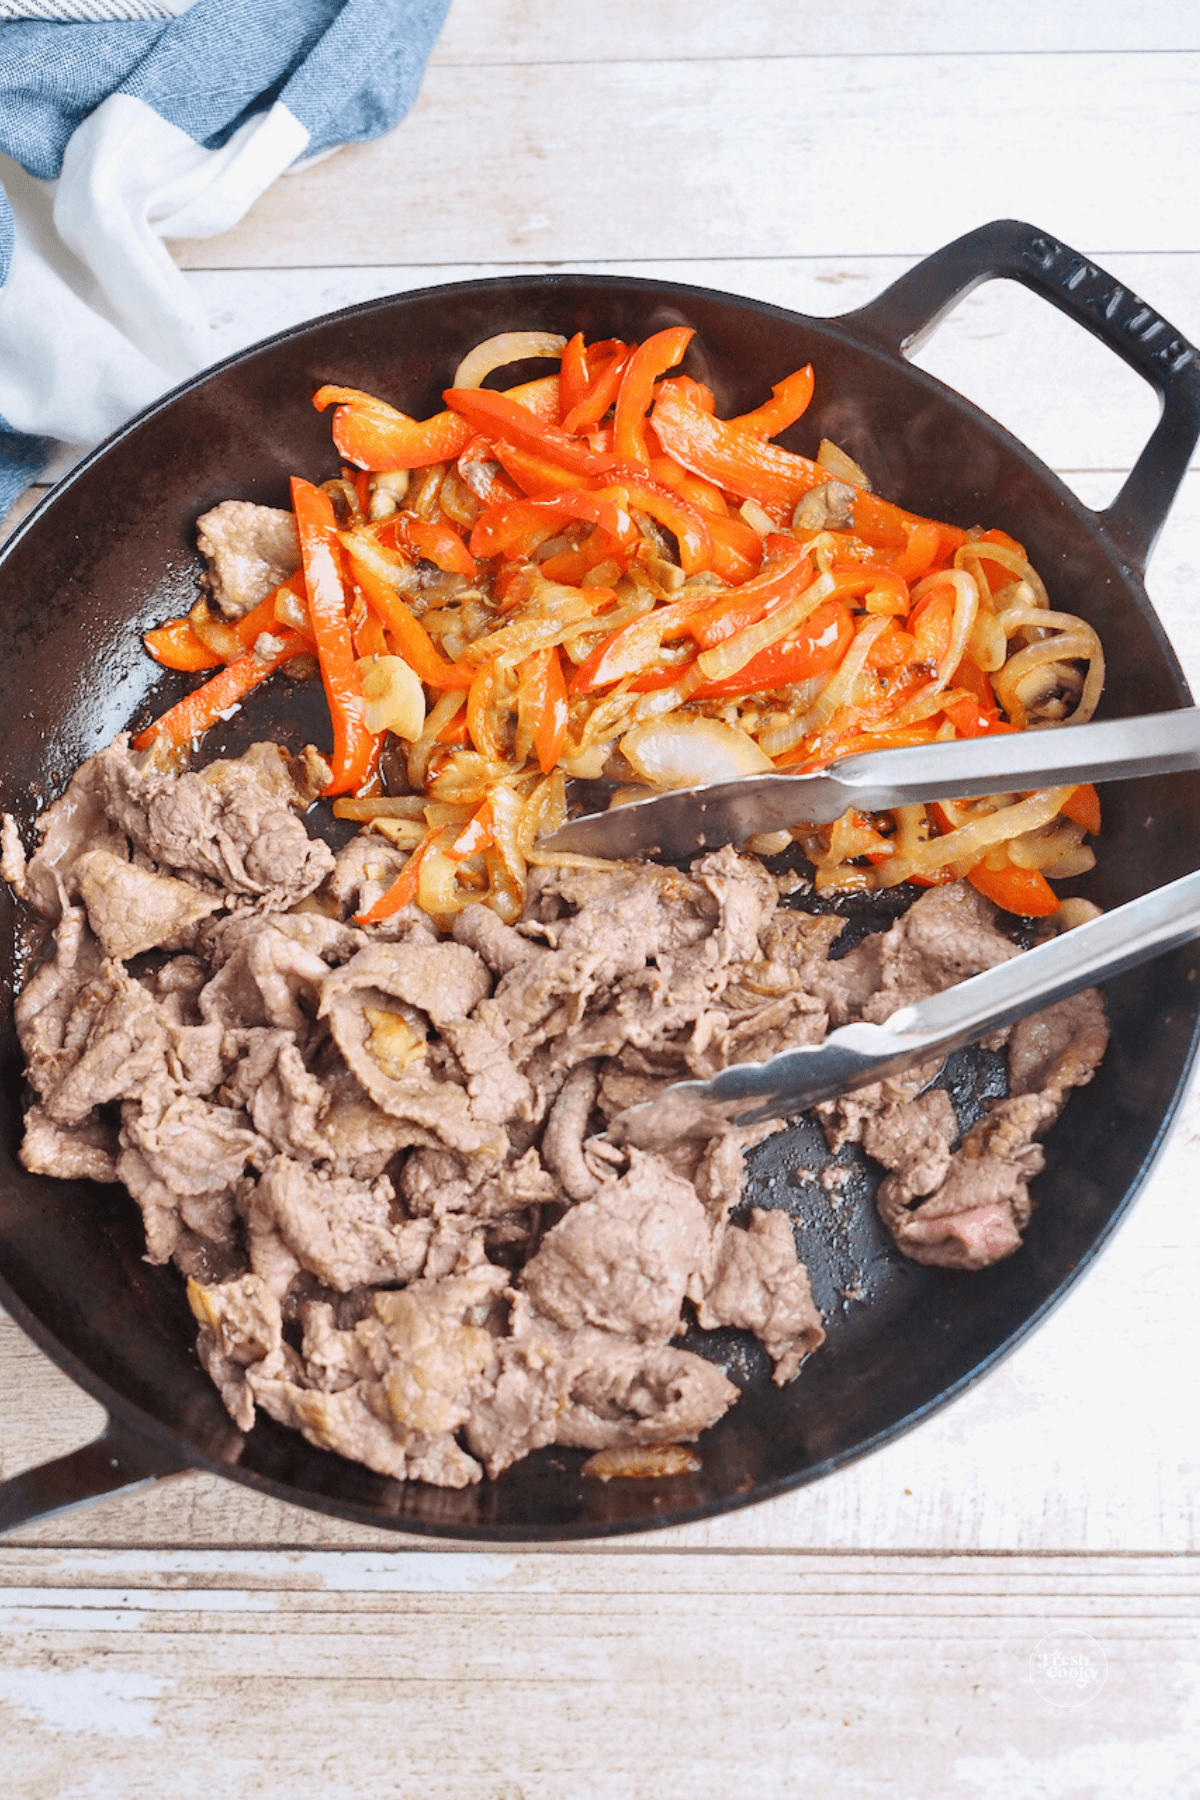 Browning shaved steak in skillet with peppers and onions on side. 